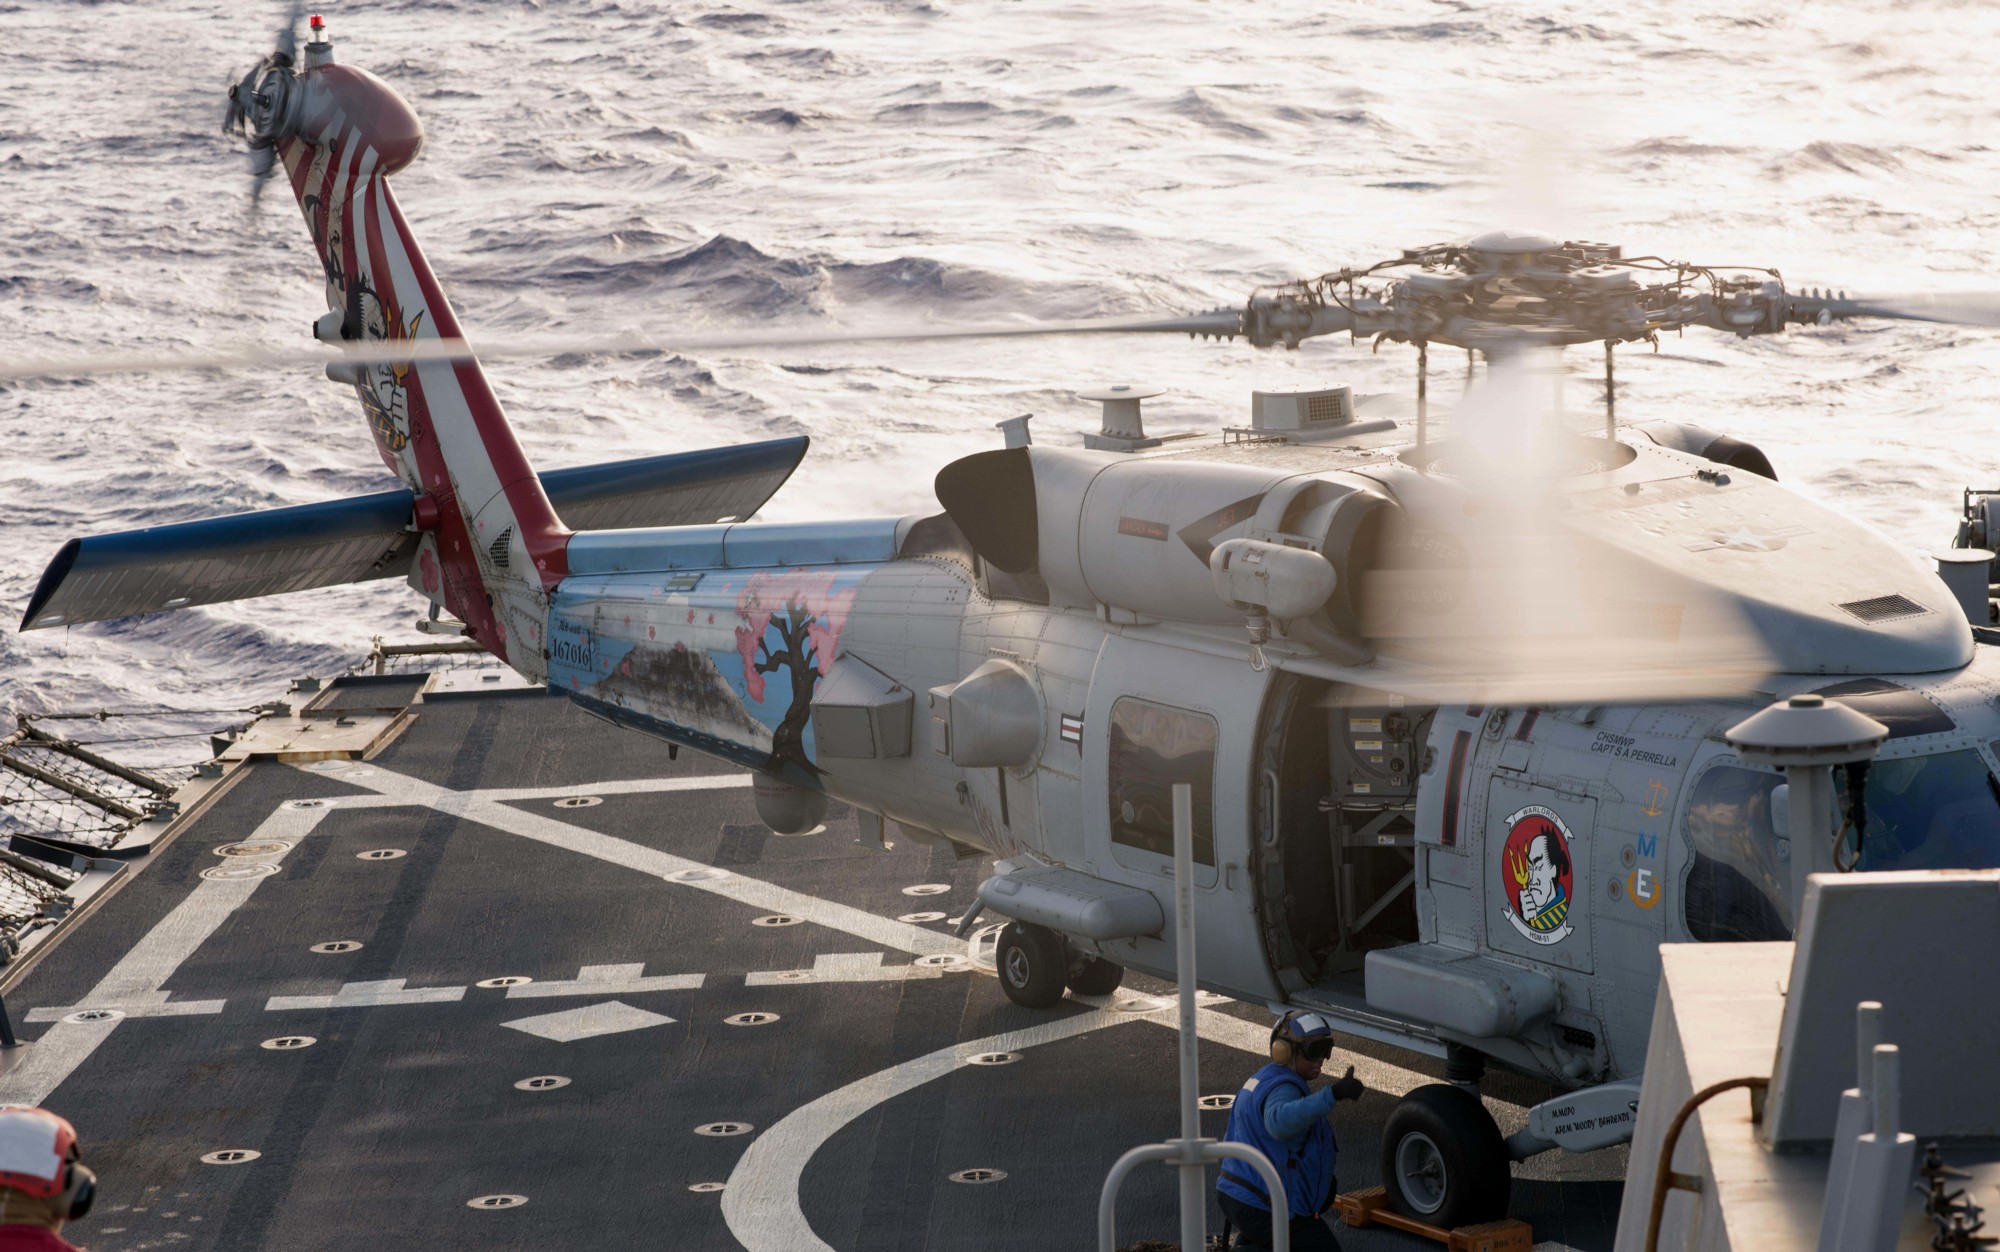 hsm-51 warlords helicopter maritime strike squadron mh-60r seahawk navy 2016 44 uss curtis wilbur ddg-54